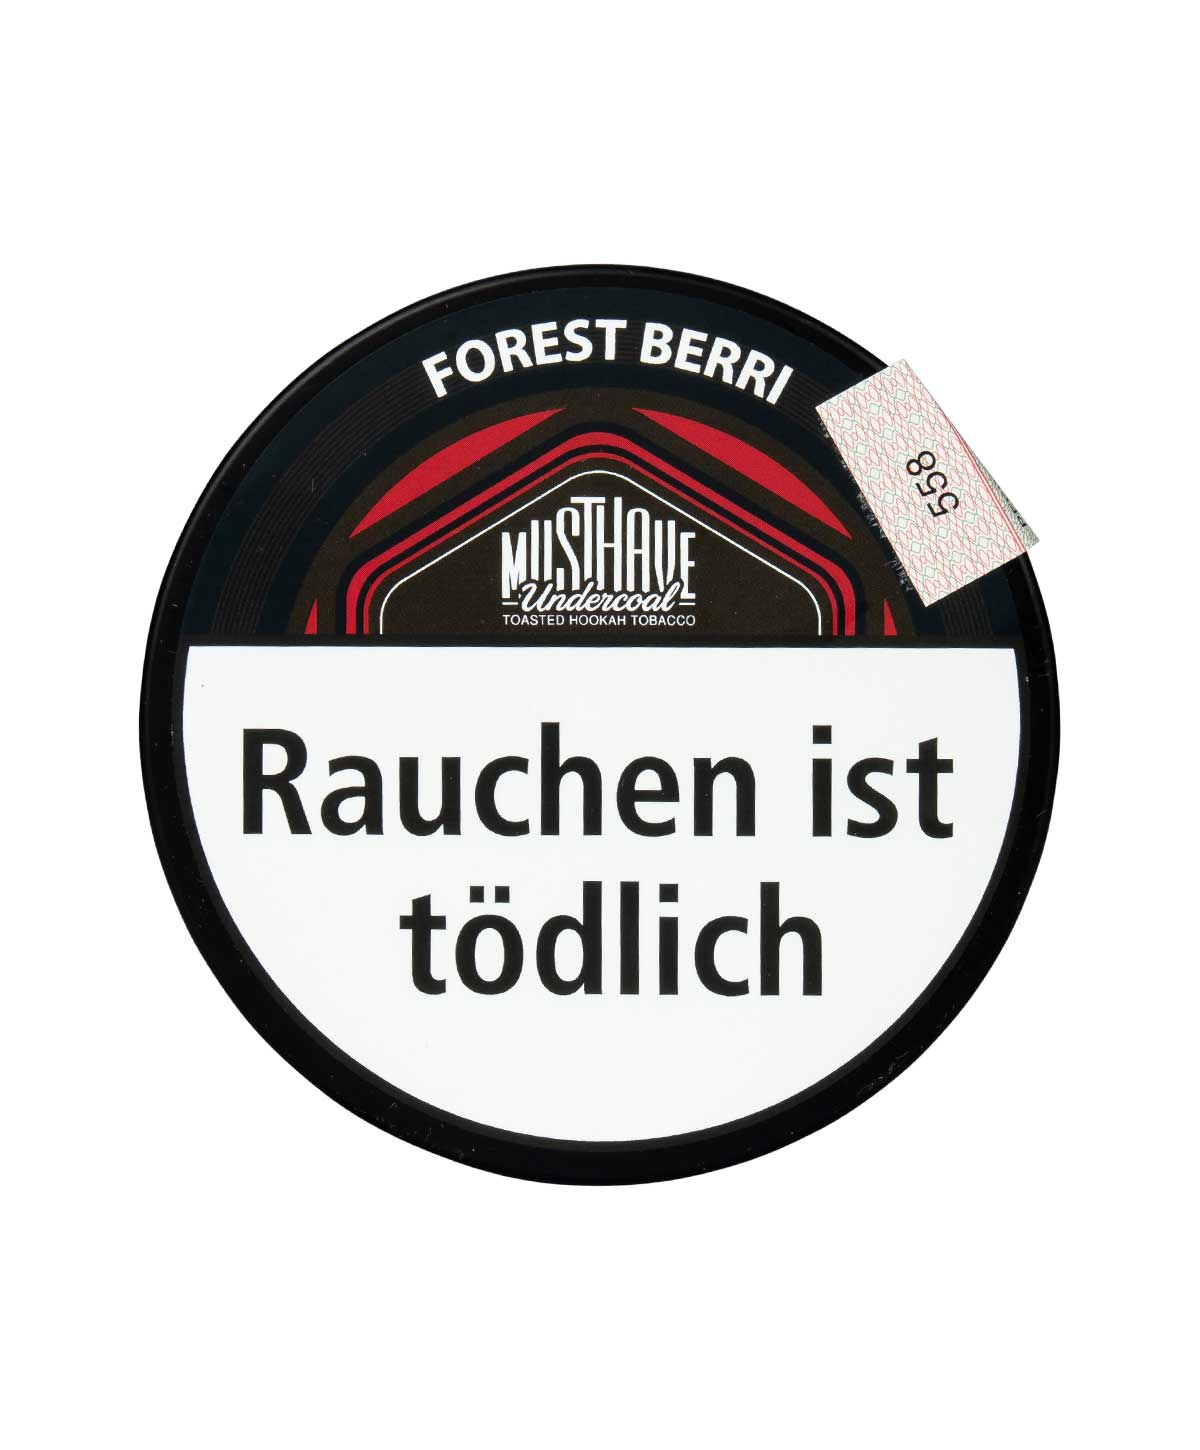 Musthave - Forest Berri 200g